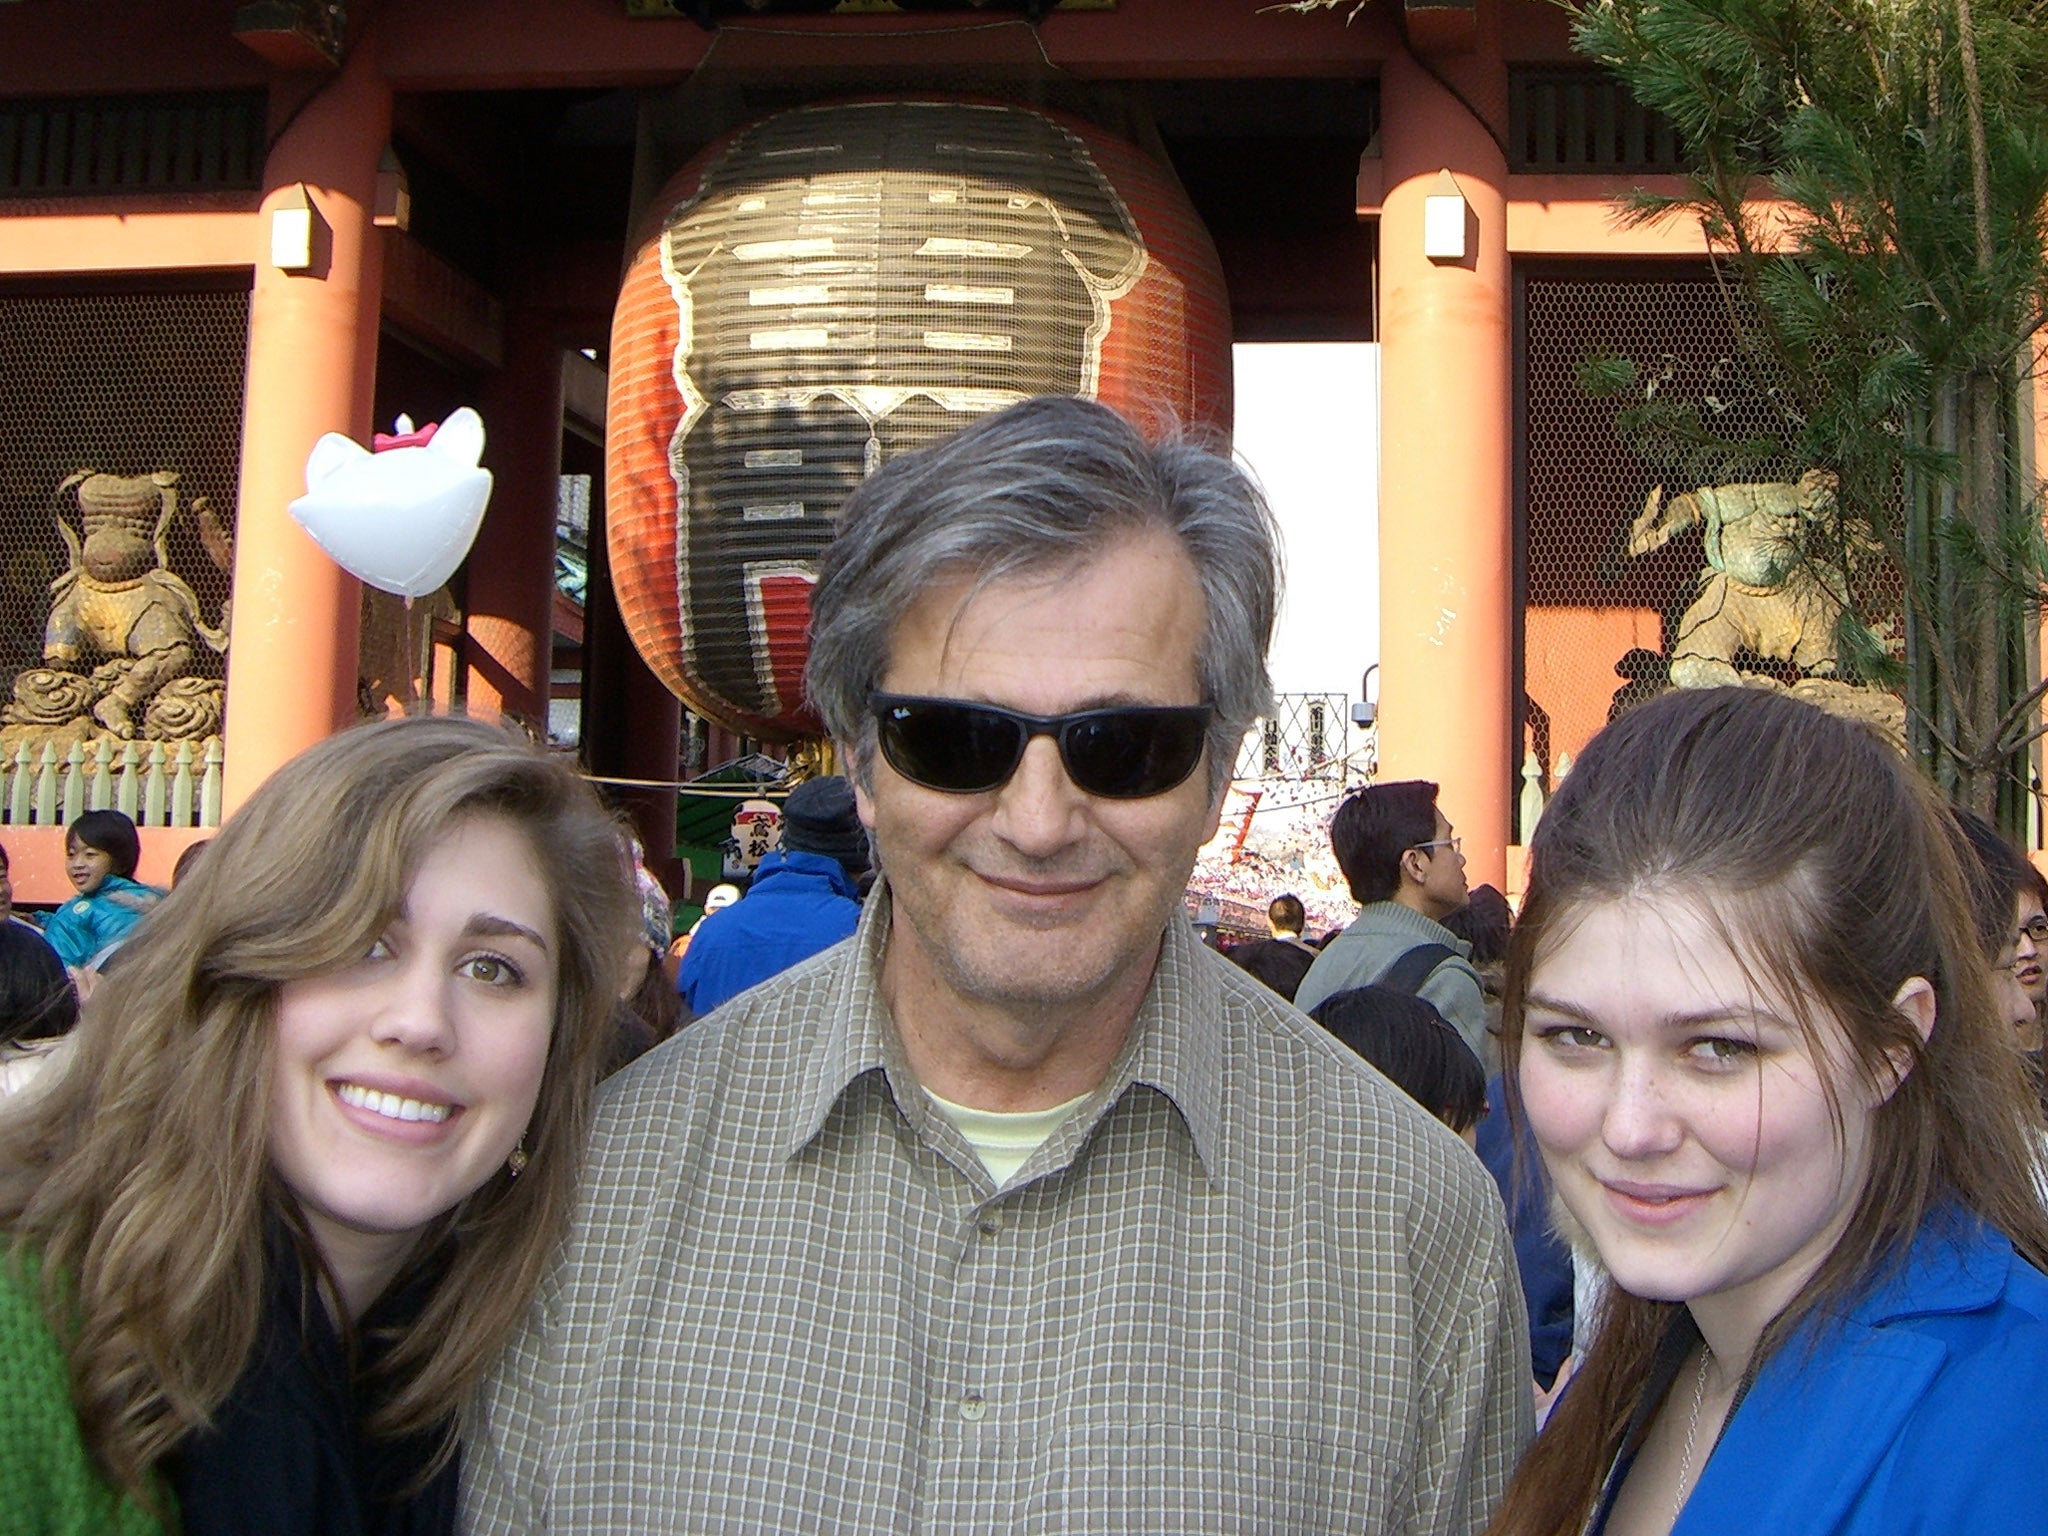 Victoria Stone—Family vacation in Tokyo, New Year's 2008